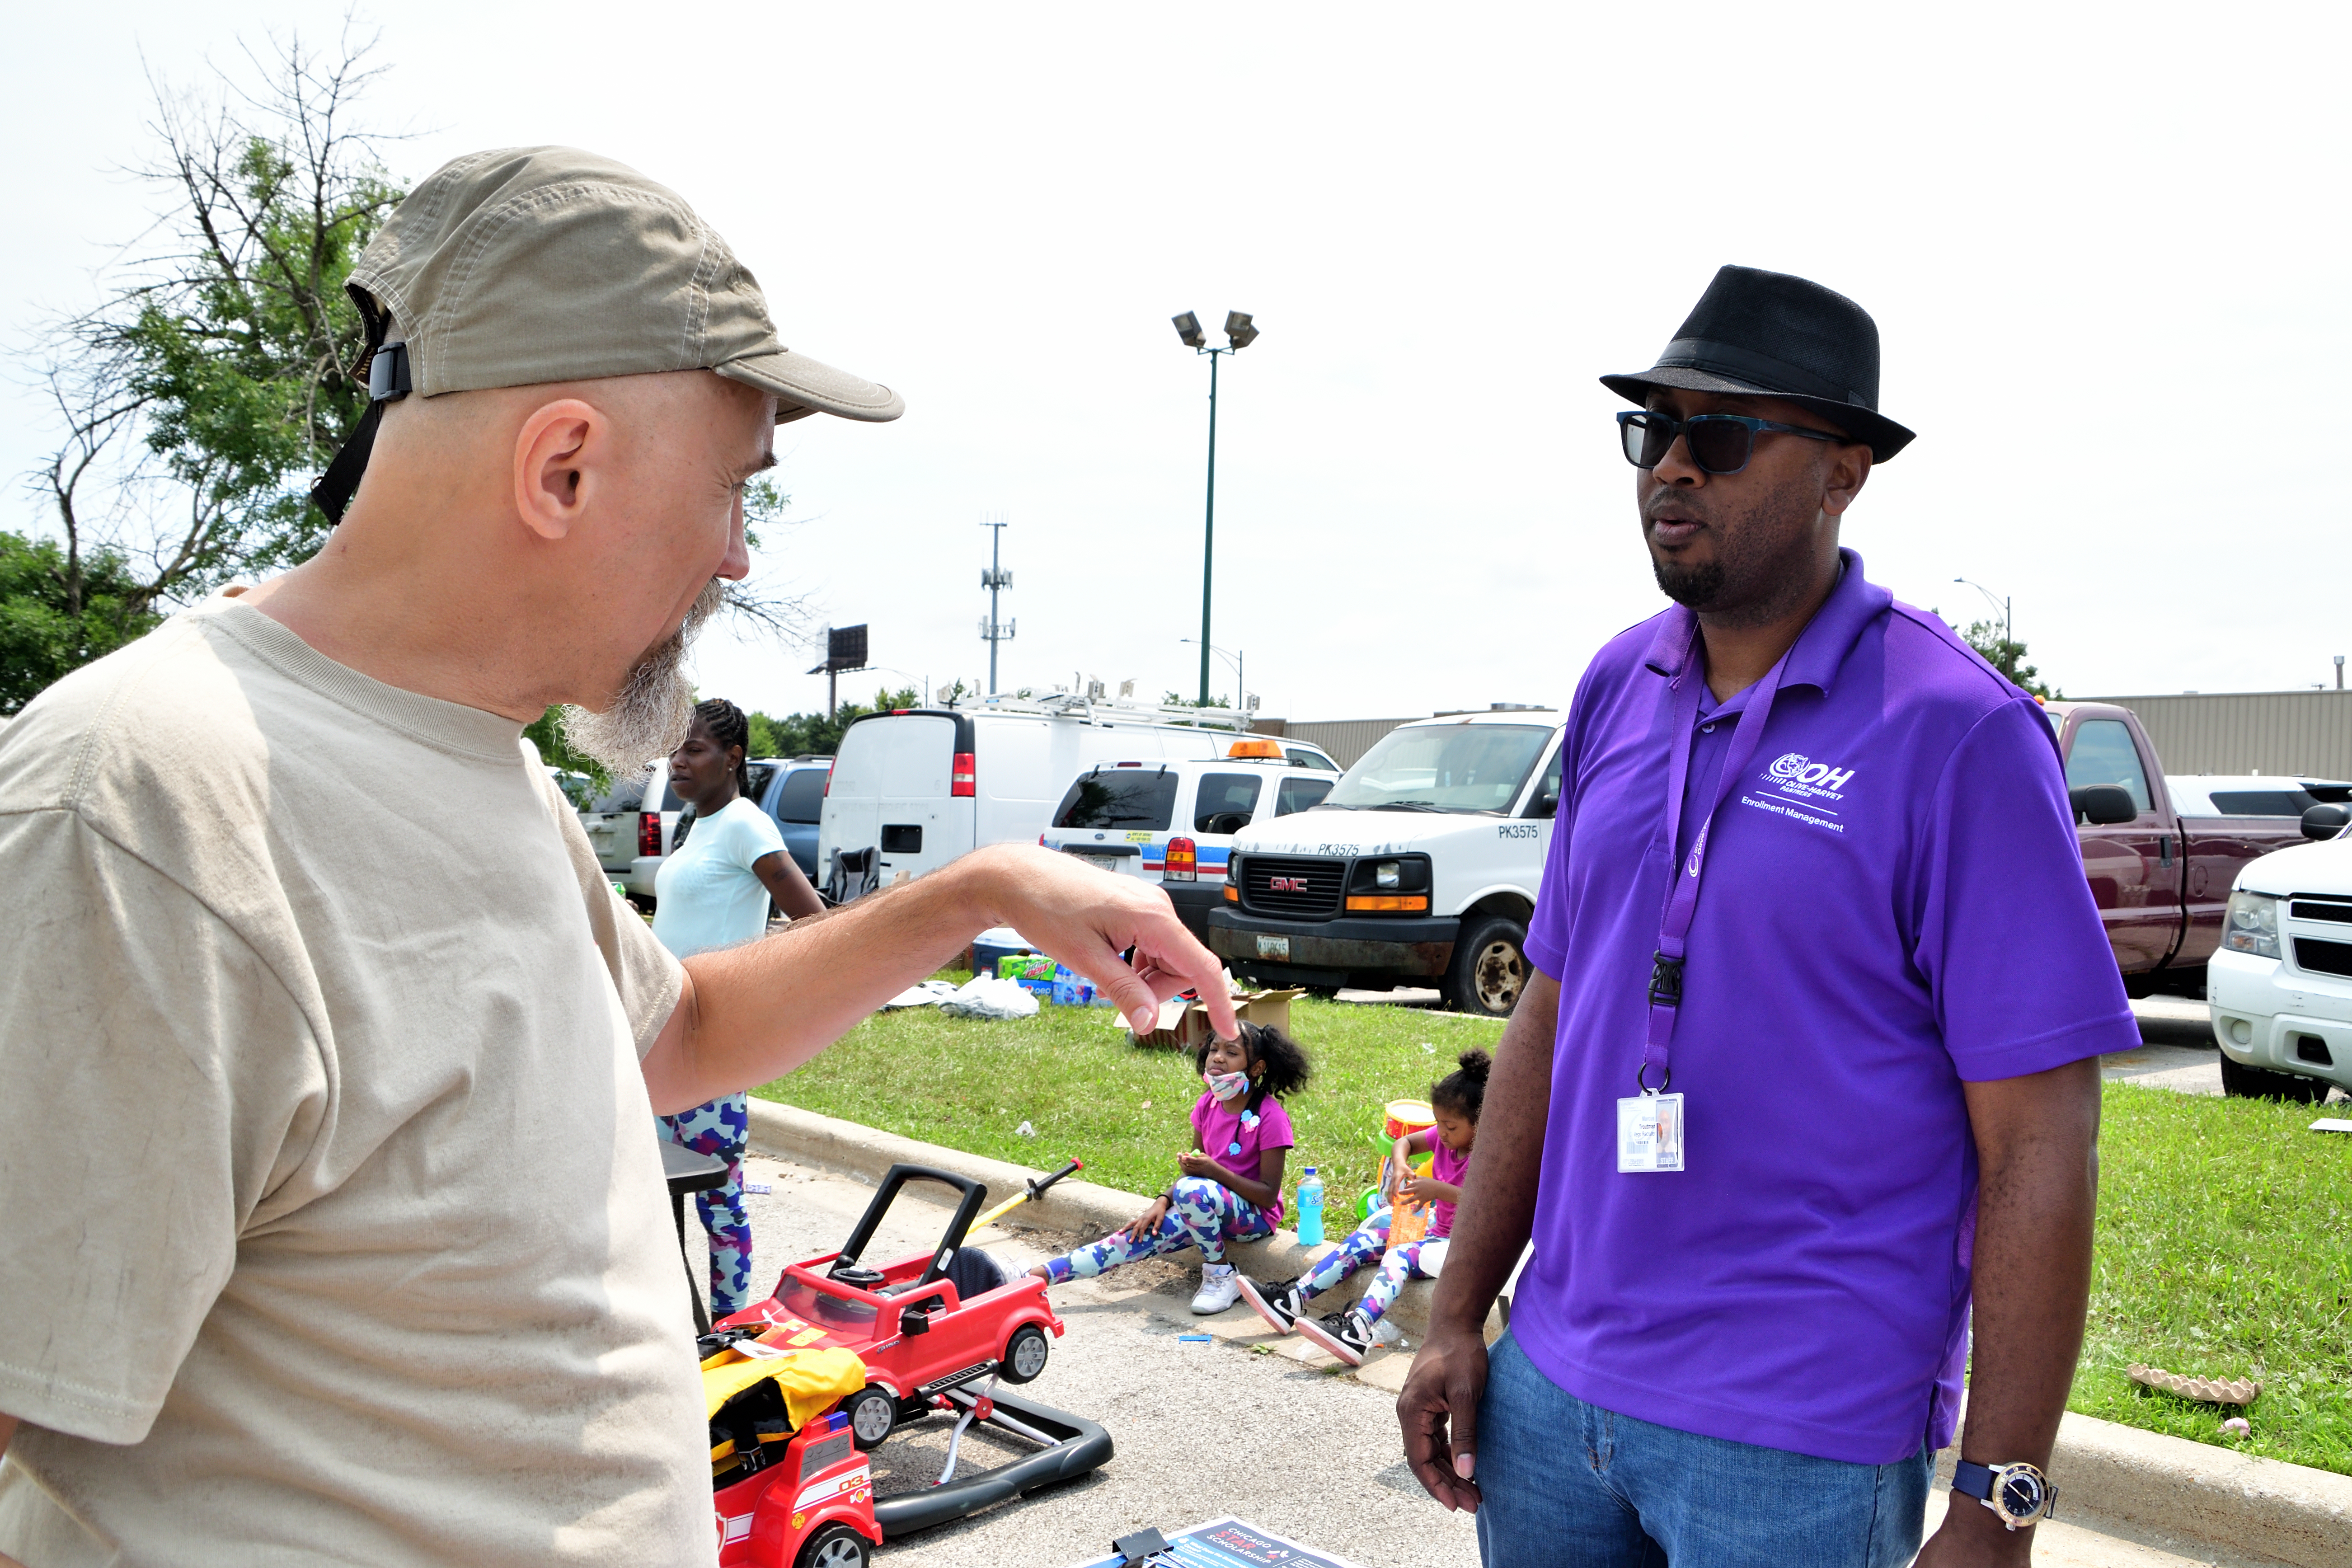 Dr. John Kugler talking to Olive Havey College Representative Marcus Troutman, Community Festival 2021, 5th District Chicago Police Headquarters, July 17, 2021 (pic by Emi Yamamoto)